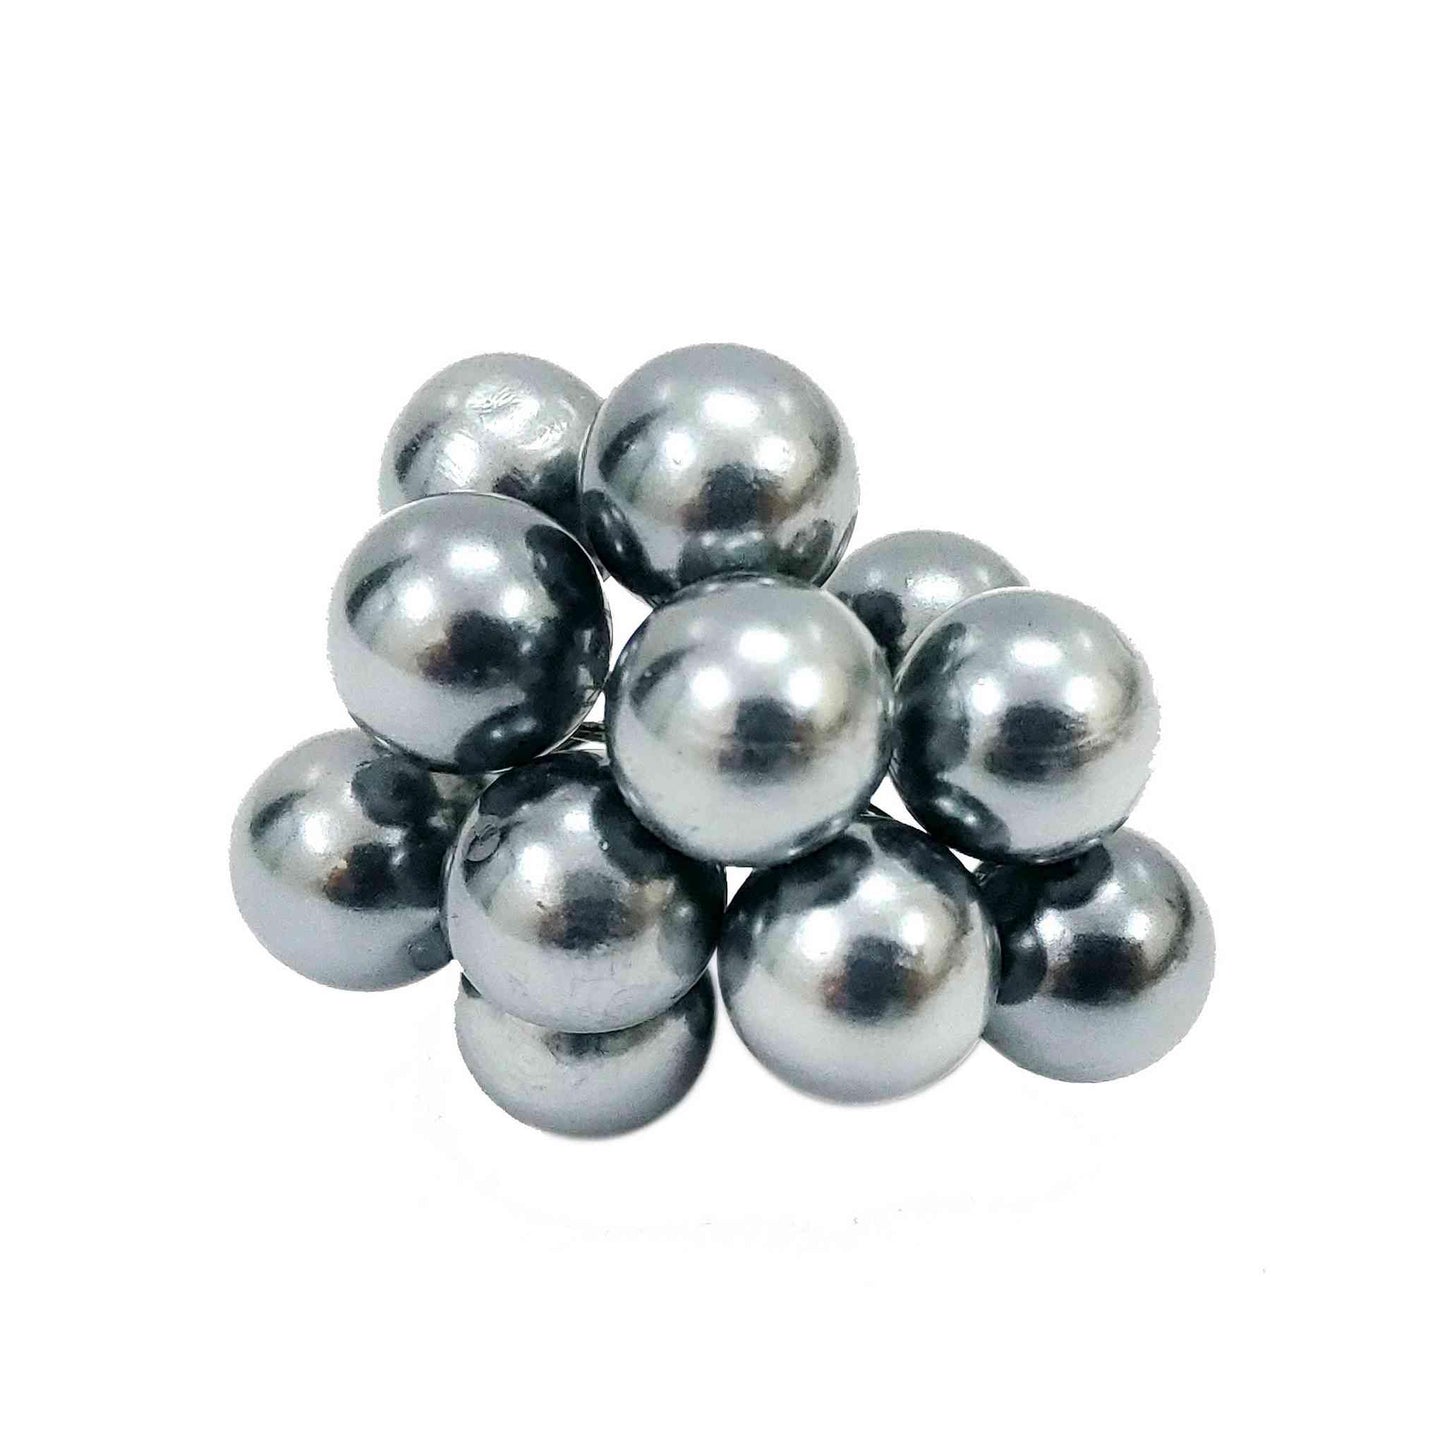 Indian Petals Mettalic finish Pearl Stick for DIY Craft, Trouseau Packing or Decoration (Bunch of 12) - Design 116, Dark Gray - Indian Petals